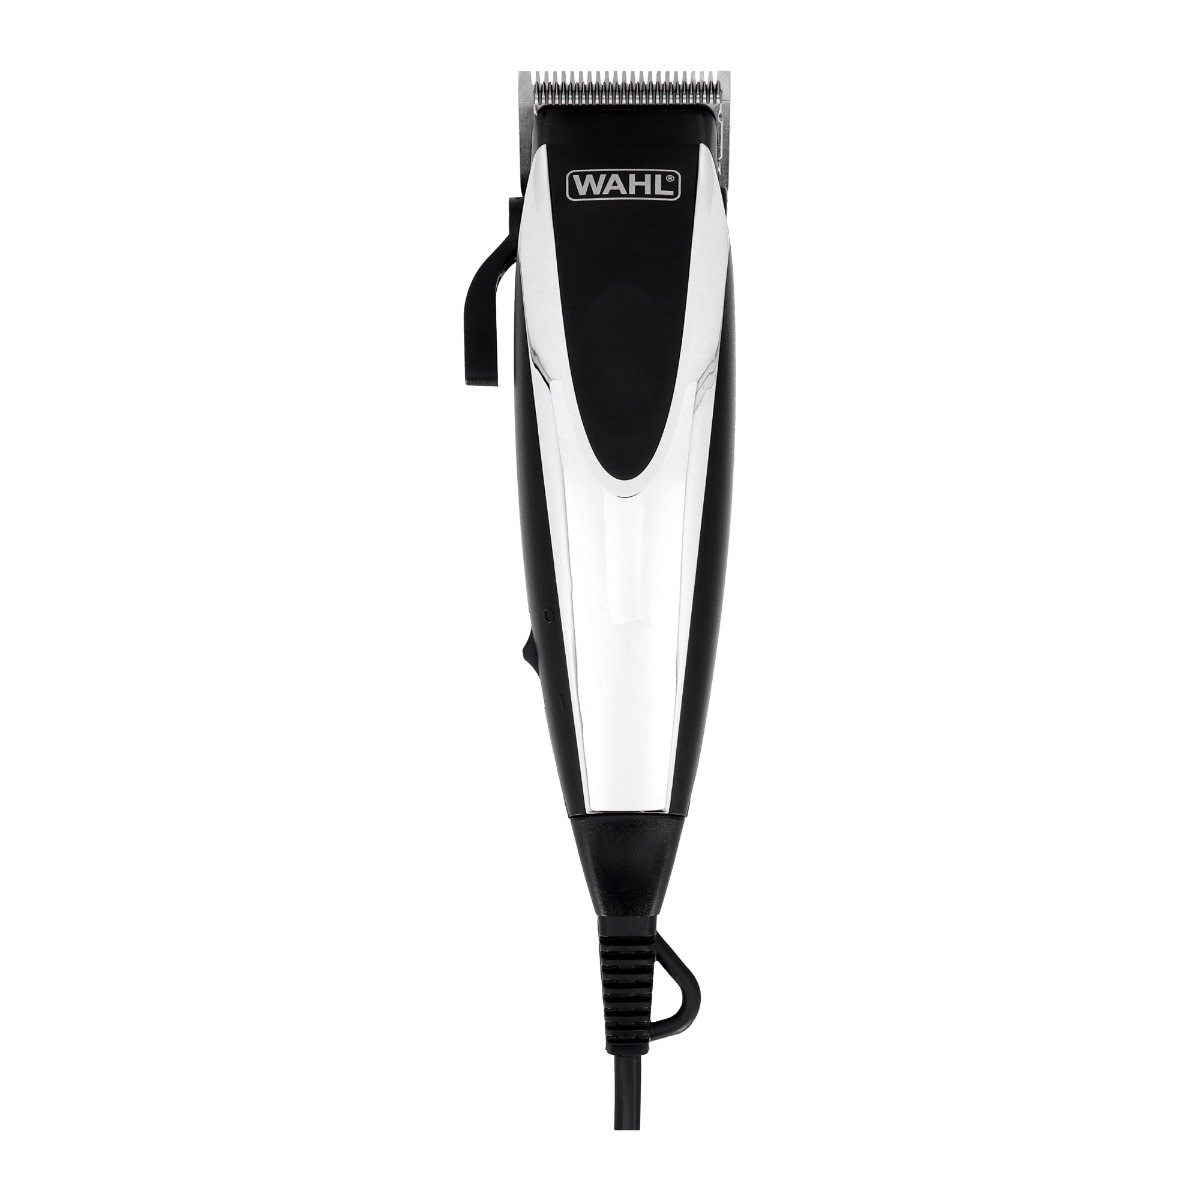 WAHL 09243-2616 Homepro clipper WAHL